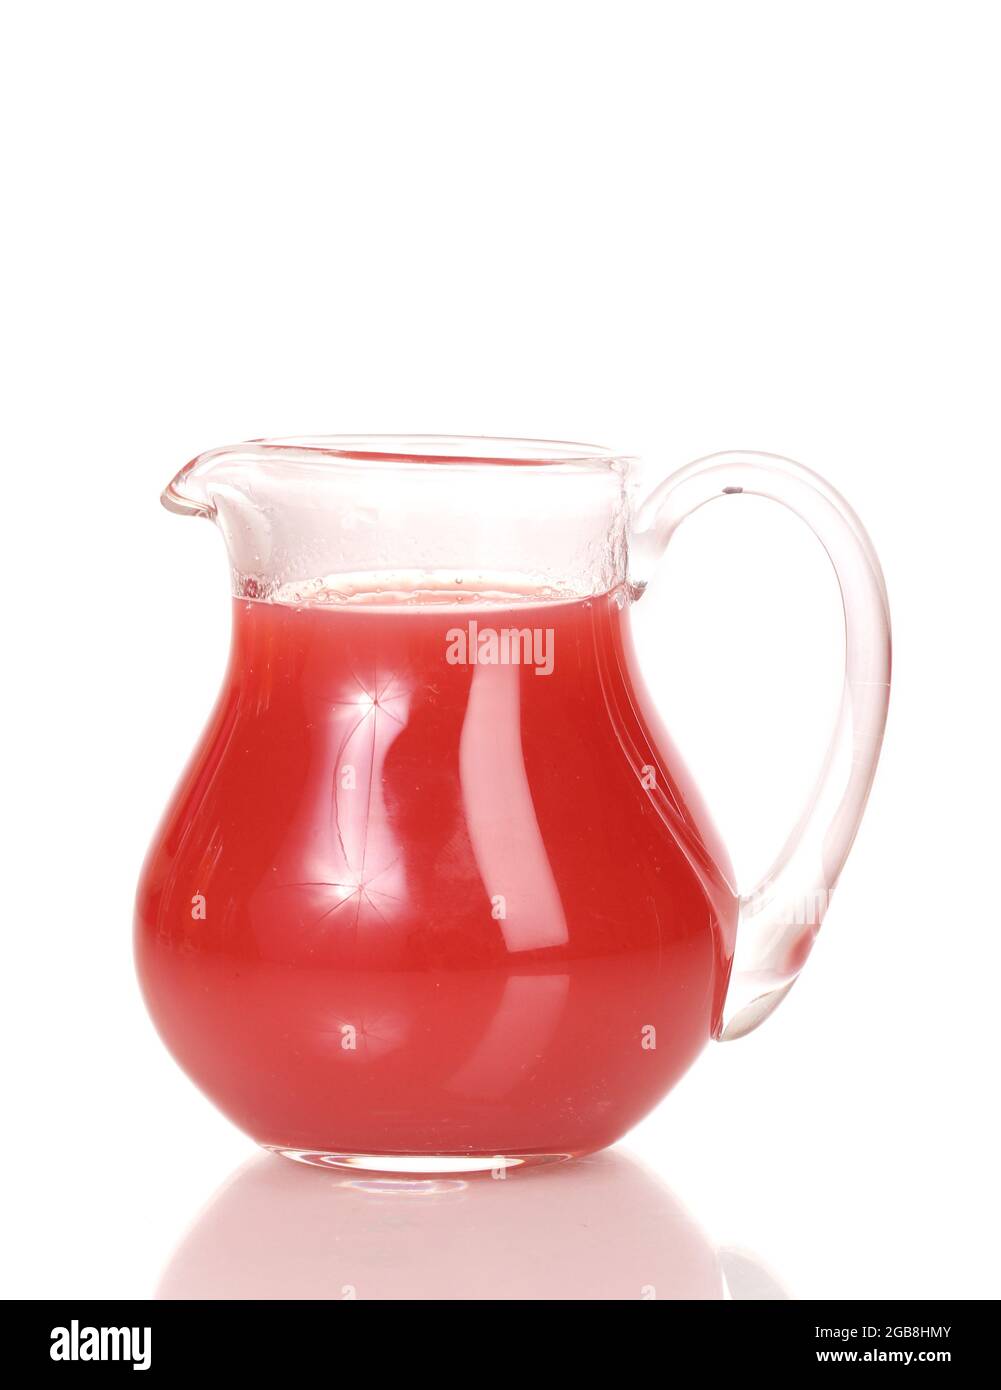 https://c8.alamy.com/comp/2GB8HMY/tropical-juice-in-glass-pitcher-isolated-on-white-2GB8HMY.jpg